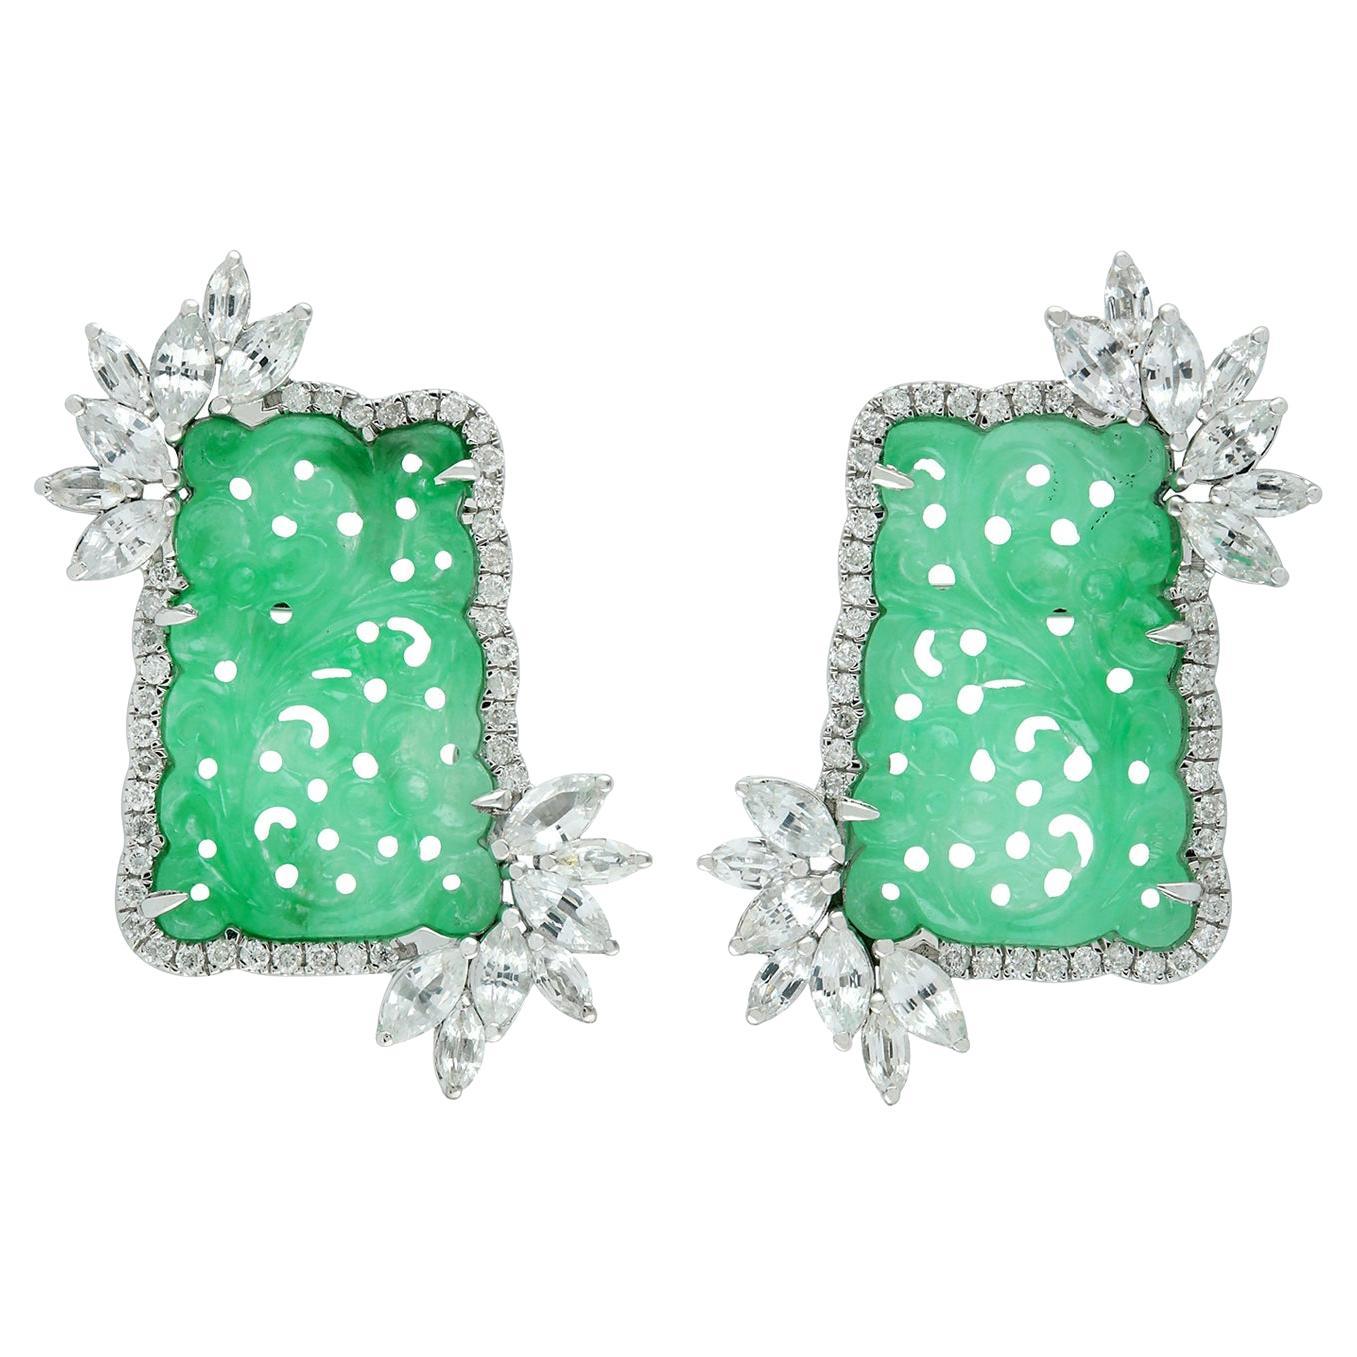 Carved Jade Stud Earrings With White Sapphire & Diamonds Made In 18k White Gold